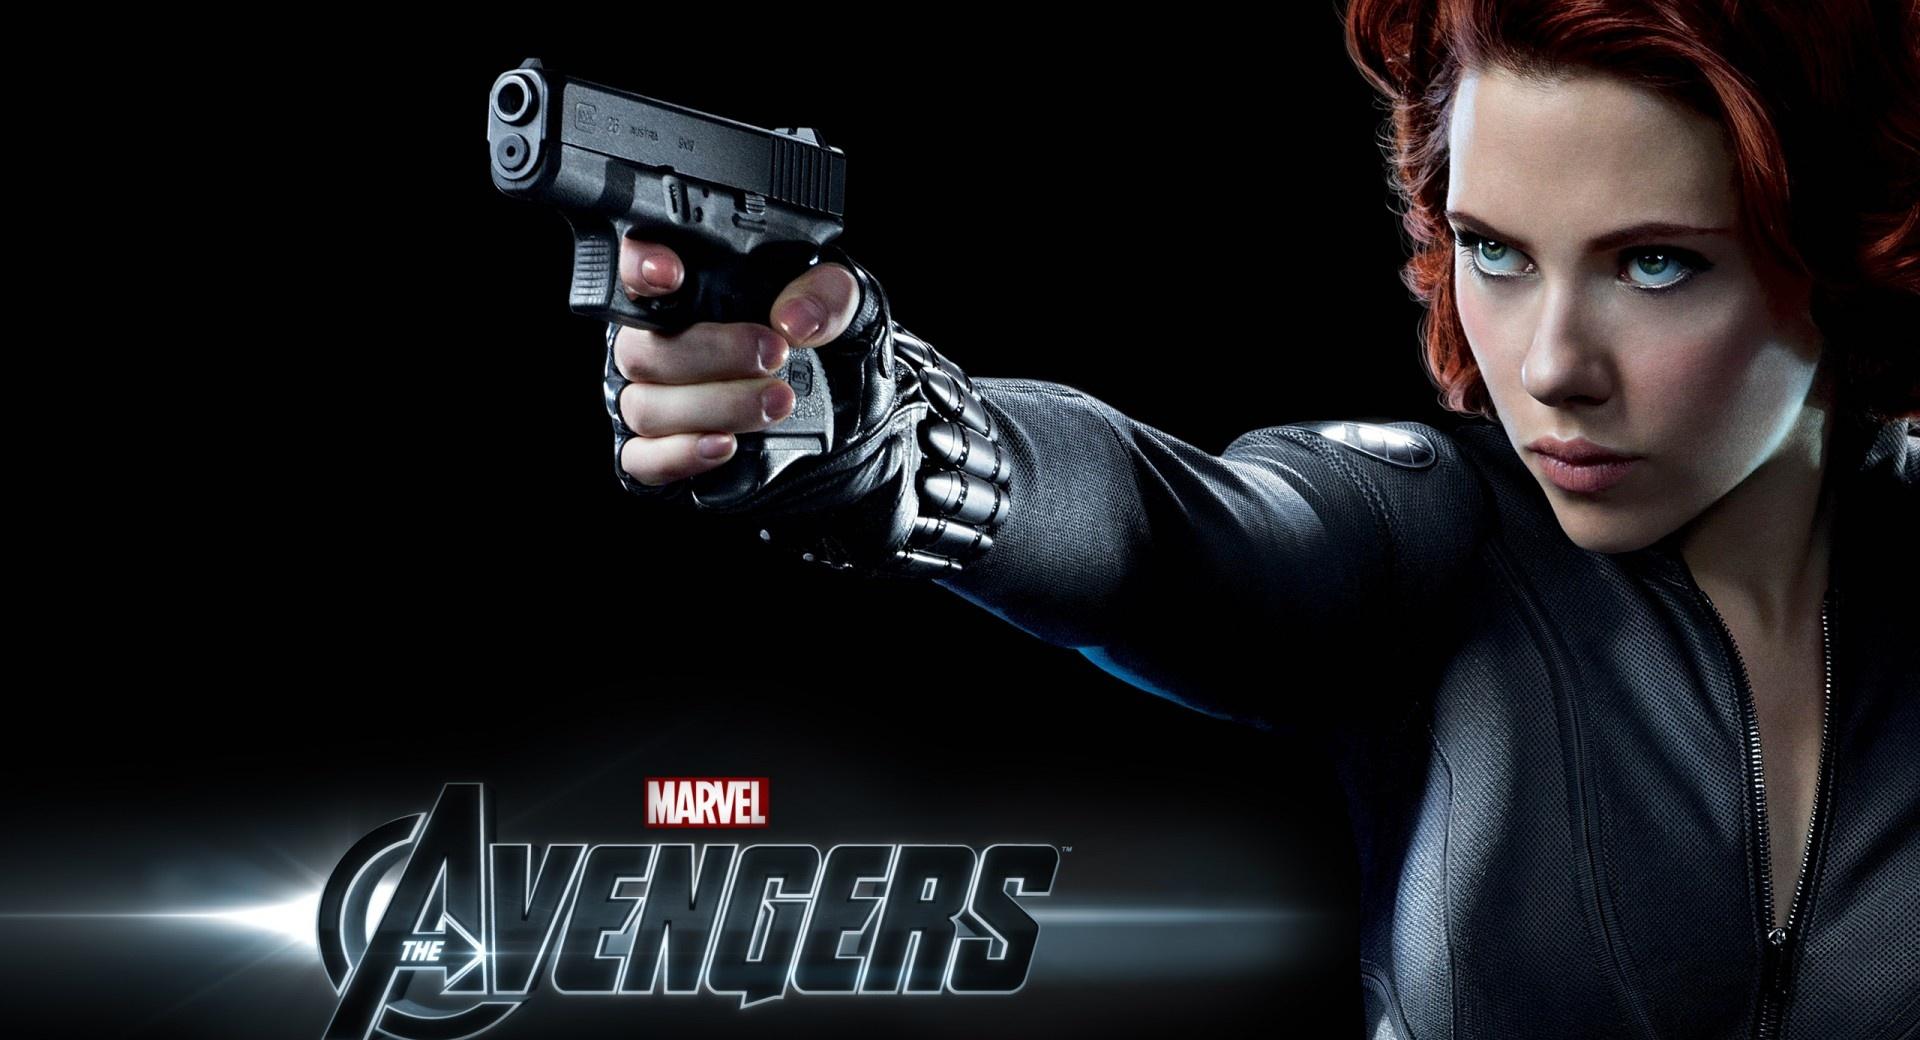 The Avengers (2012) - Black Widow wallpapers HD quality